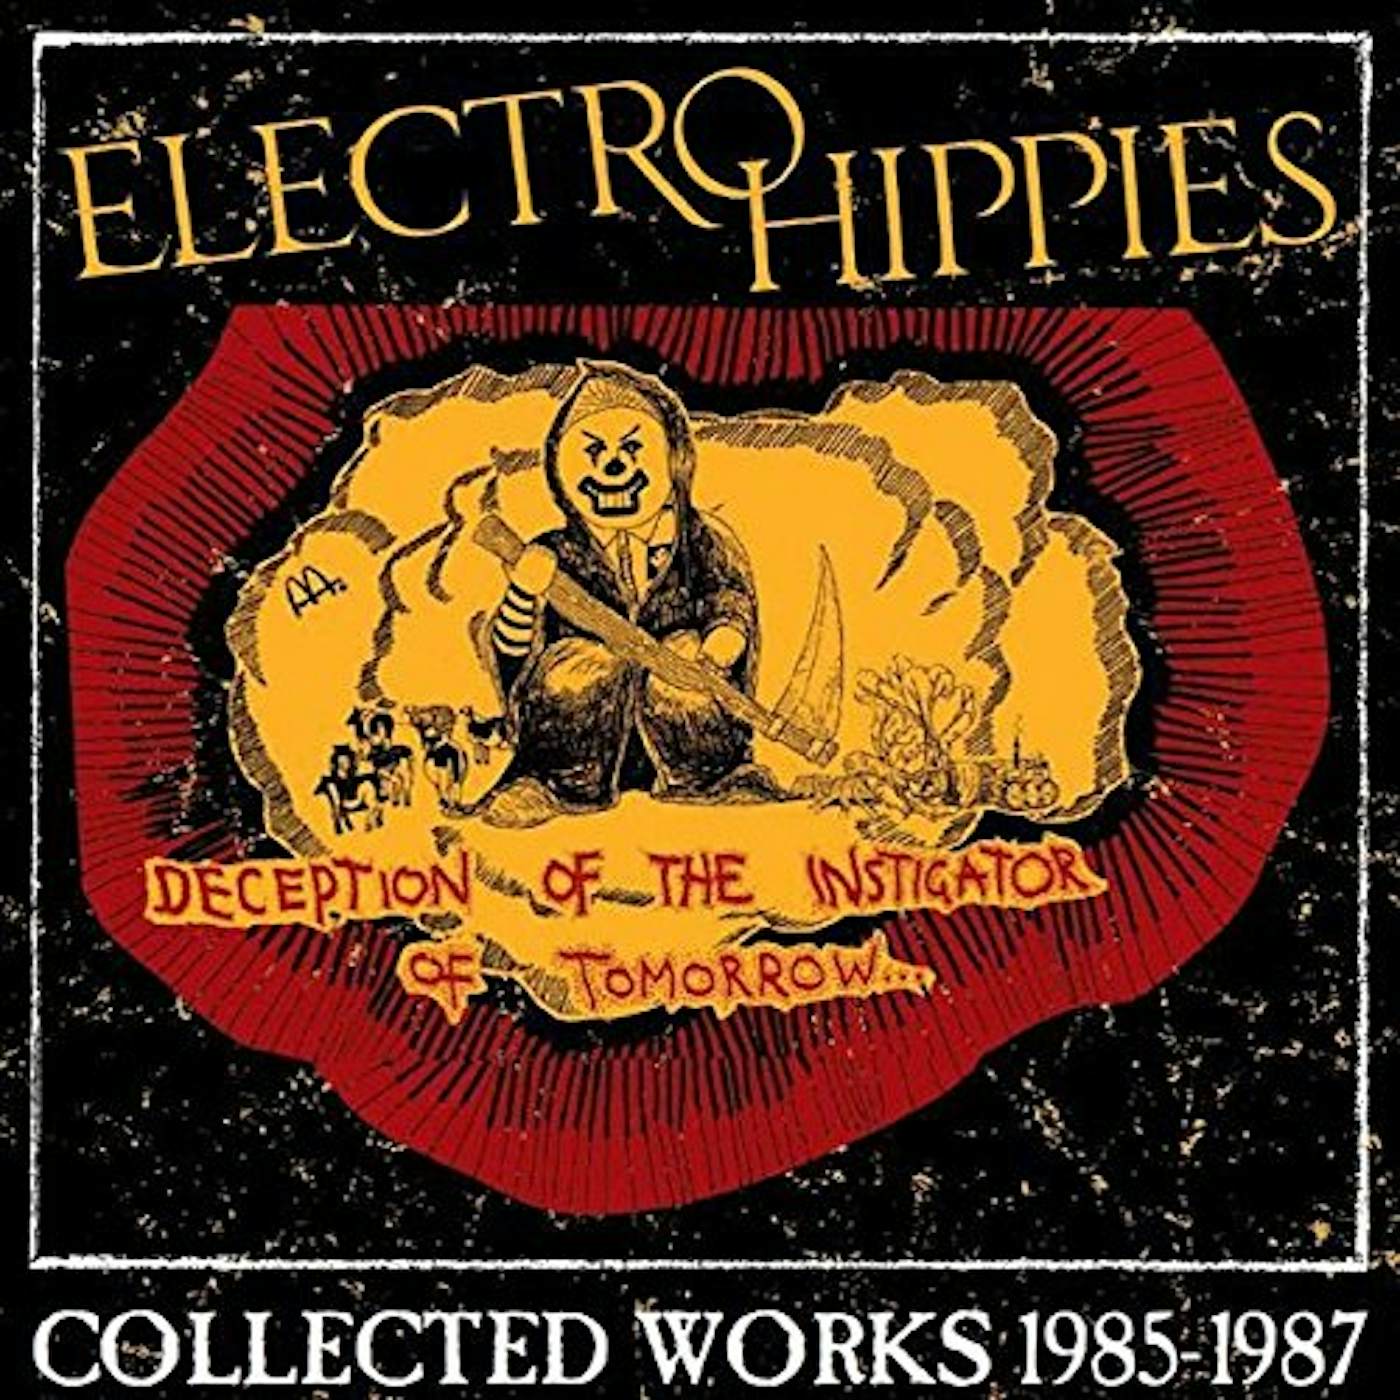 Electro Hippies DECEPTION OF THE INSTIGATOR OF TOMORROW: COLLECTED Vinyl Record